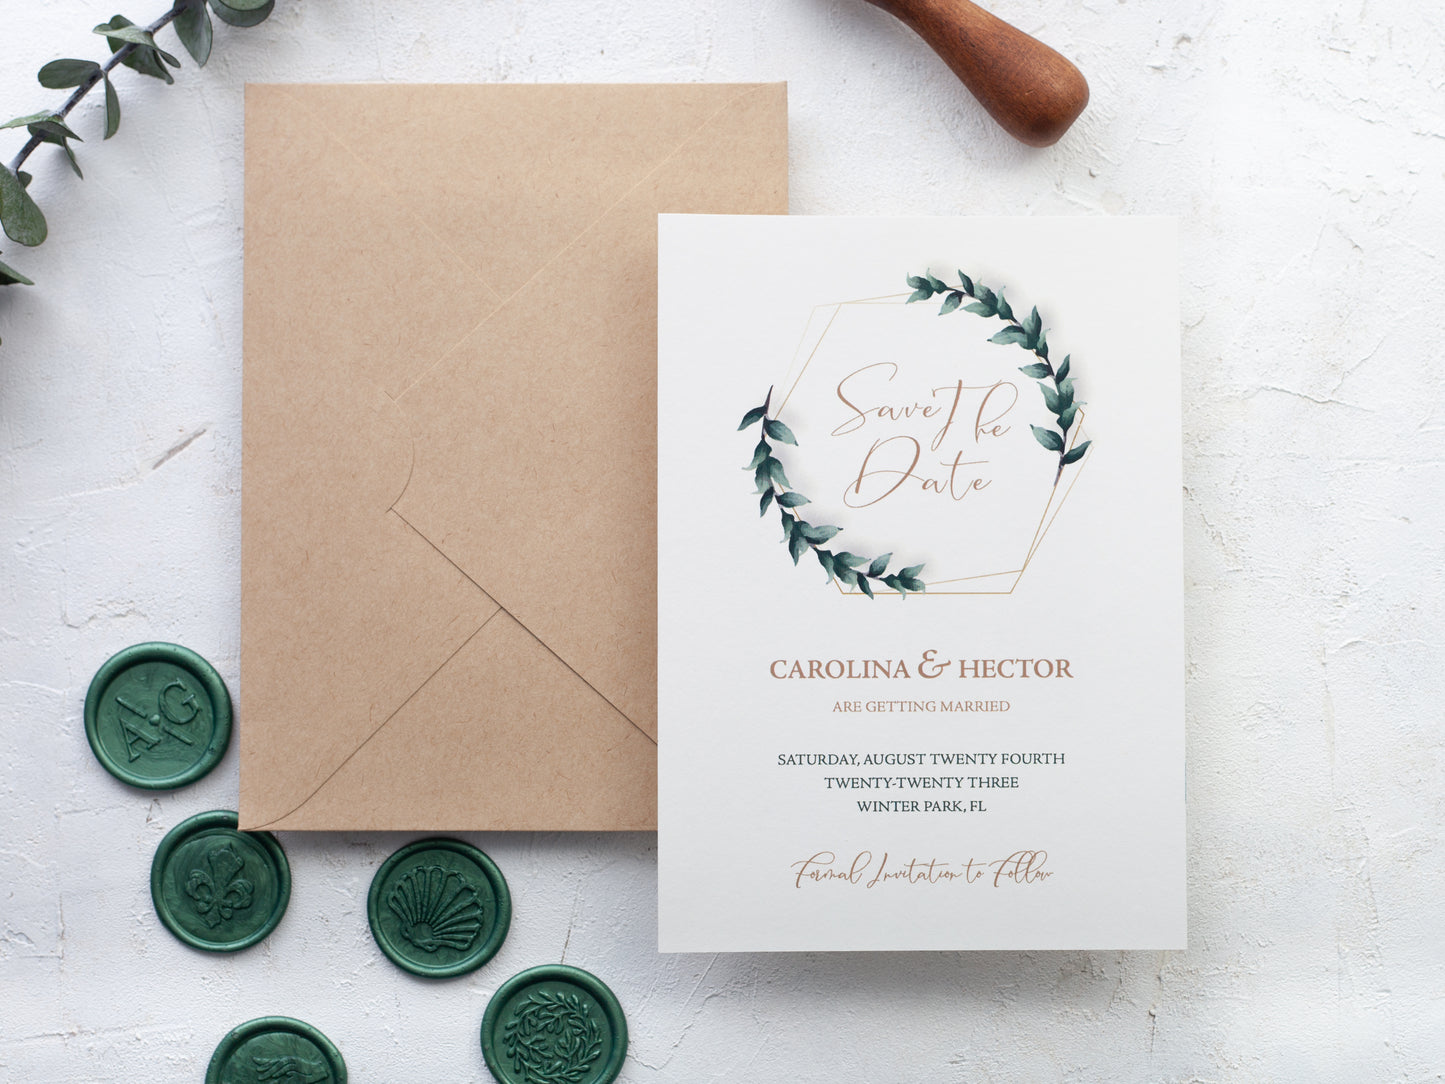 Minimal Save the Date Card with Envelope